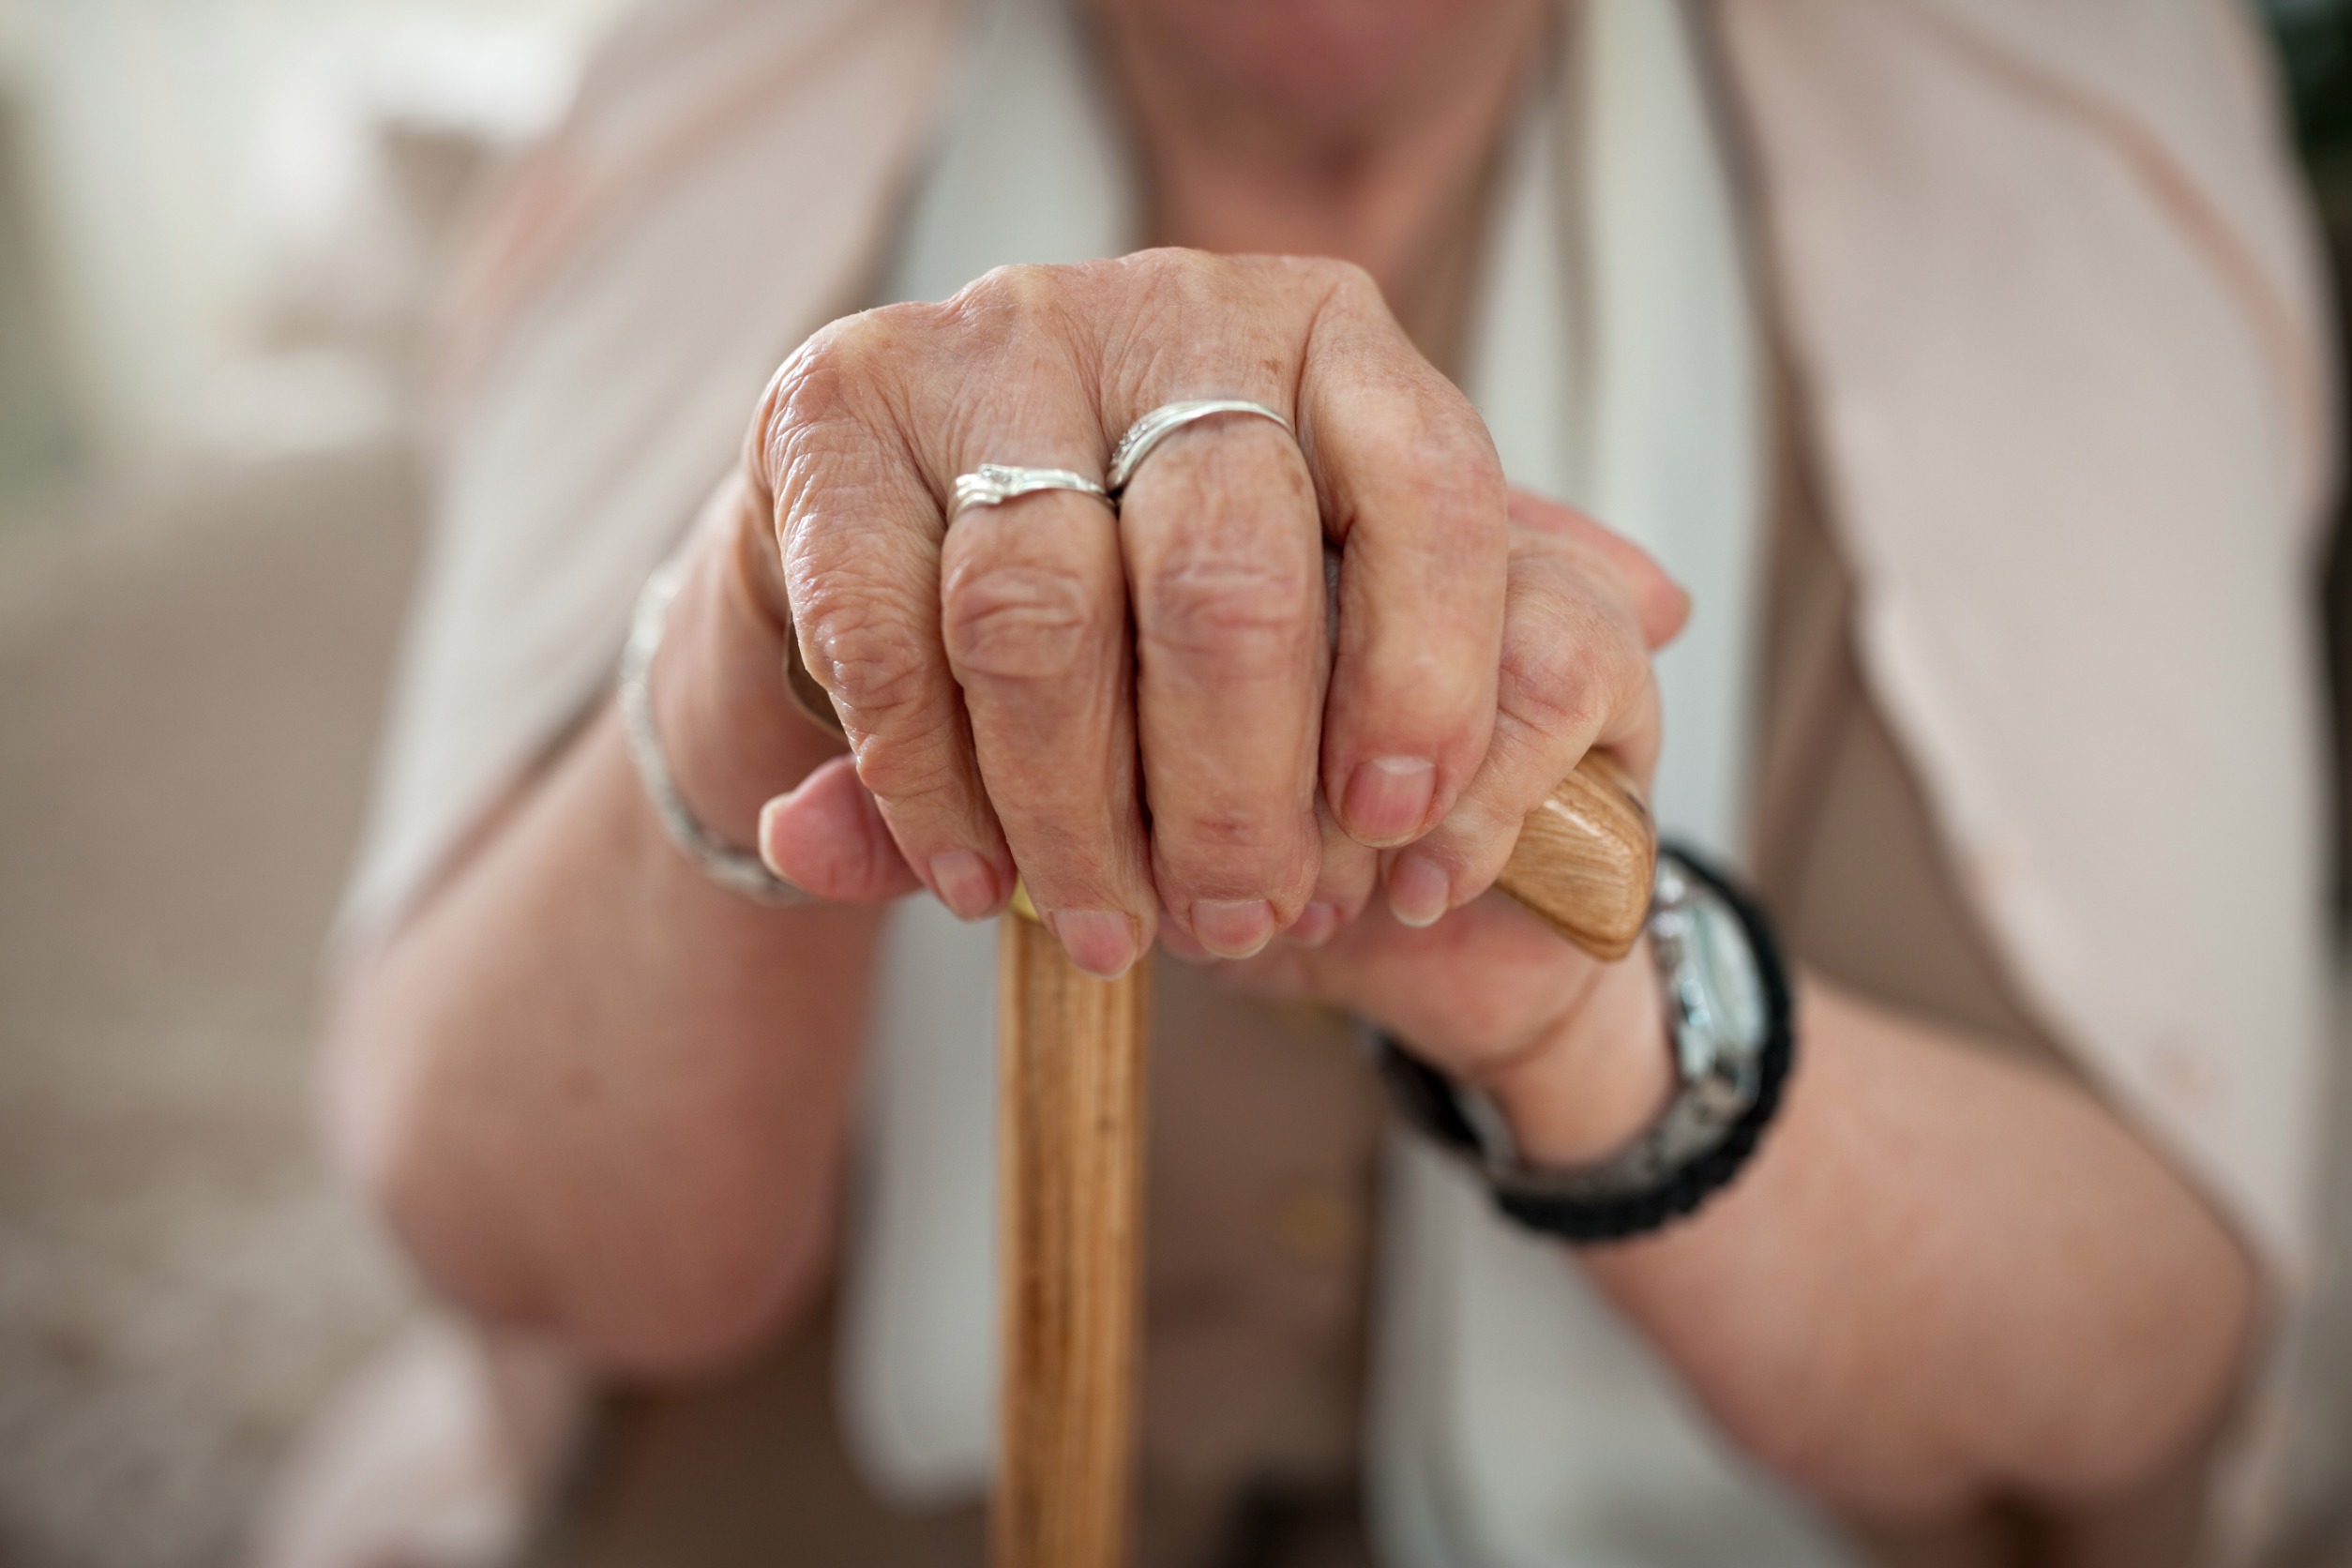 How FL laws protect nursing home residents